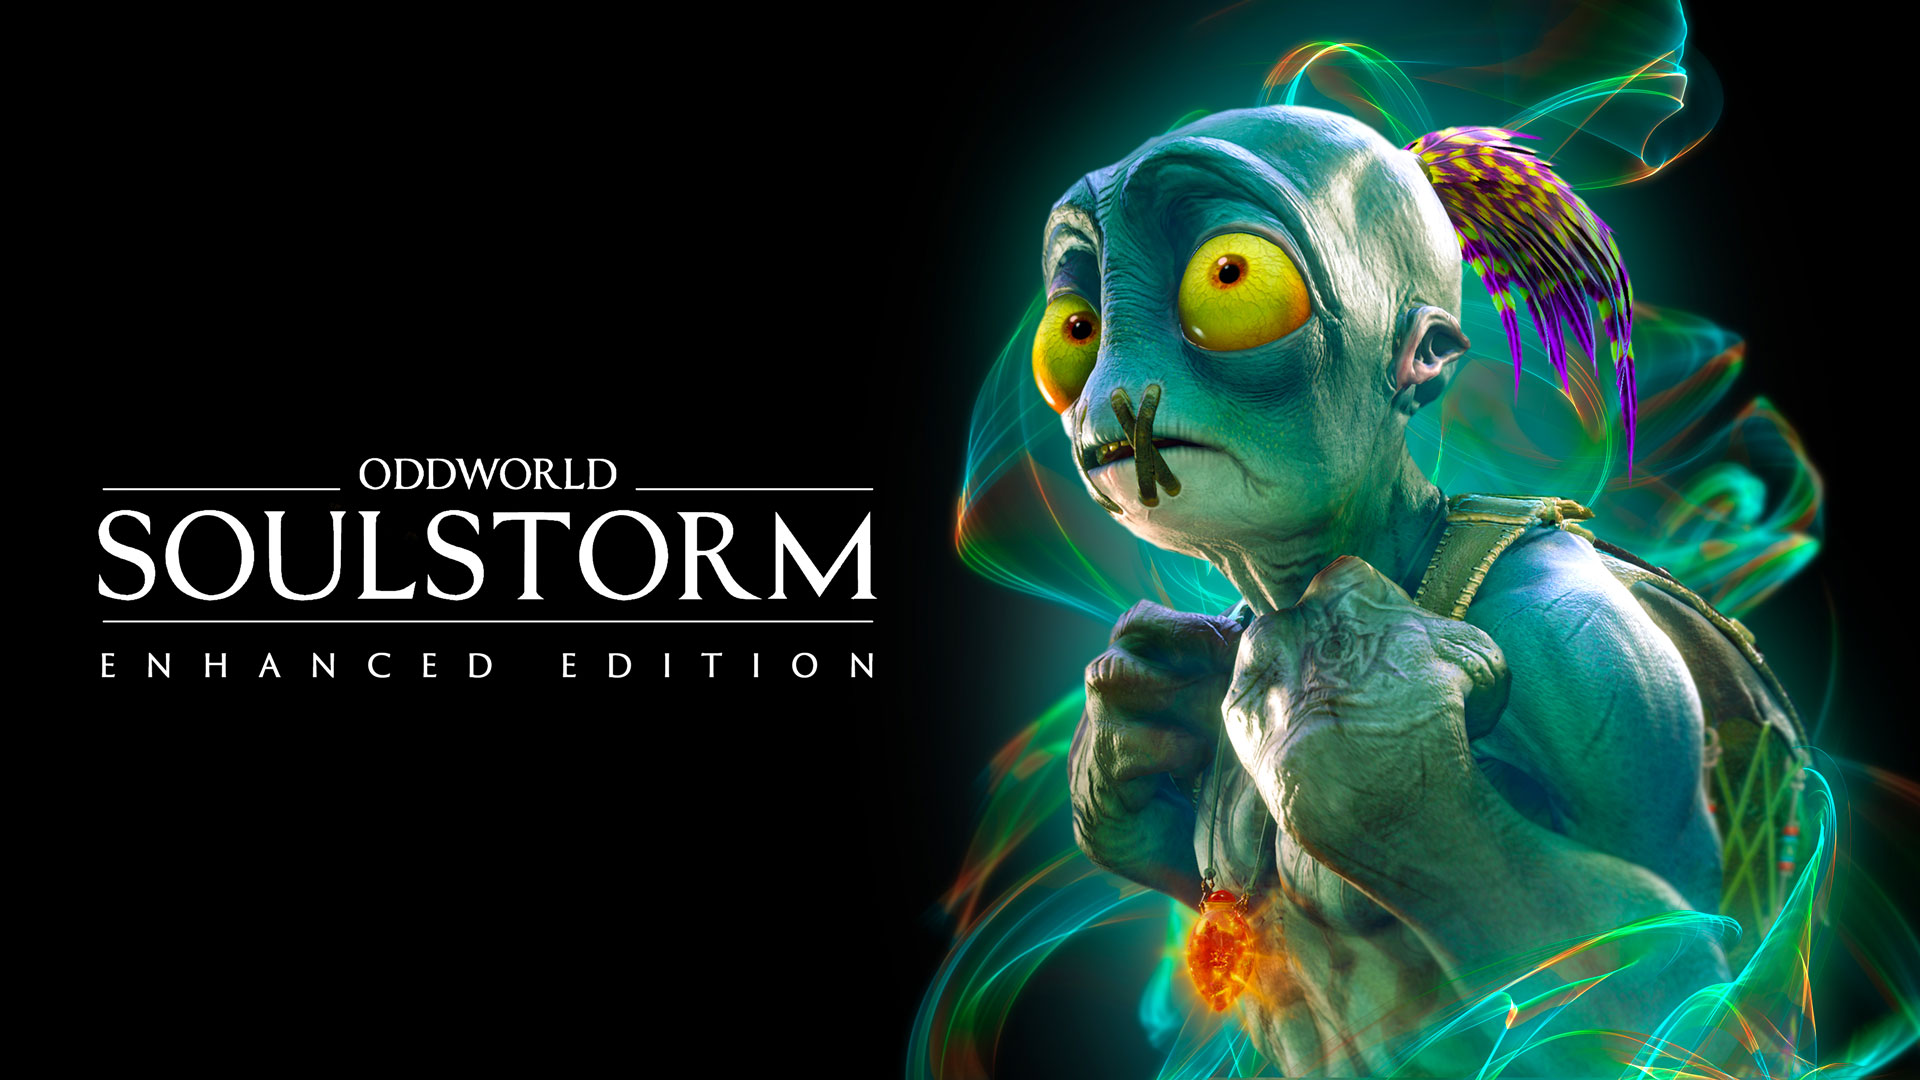 Expanded Edition release date for Oddworld: Soulstorm has been revealed